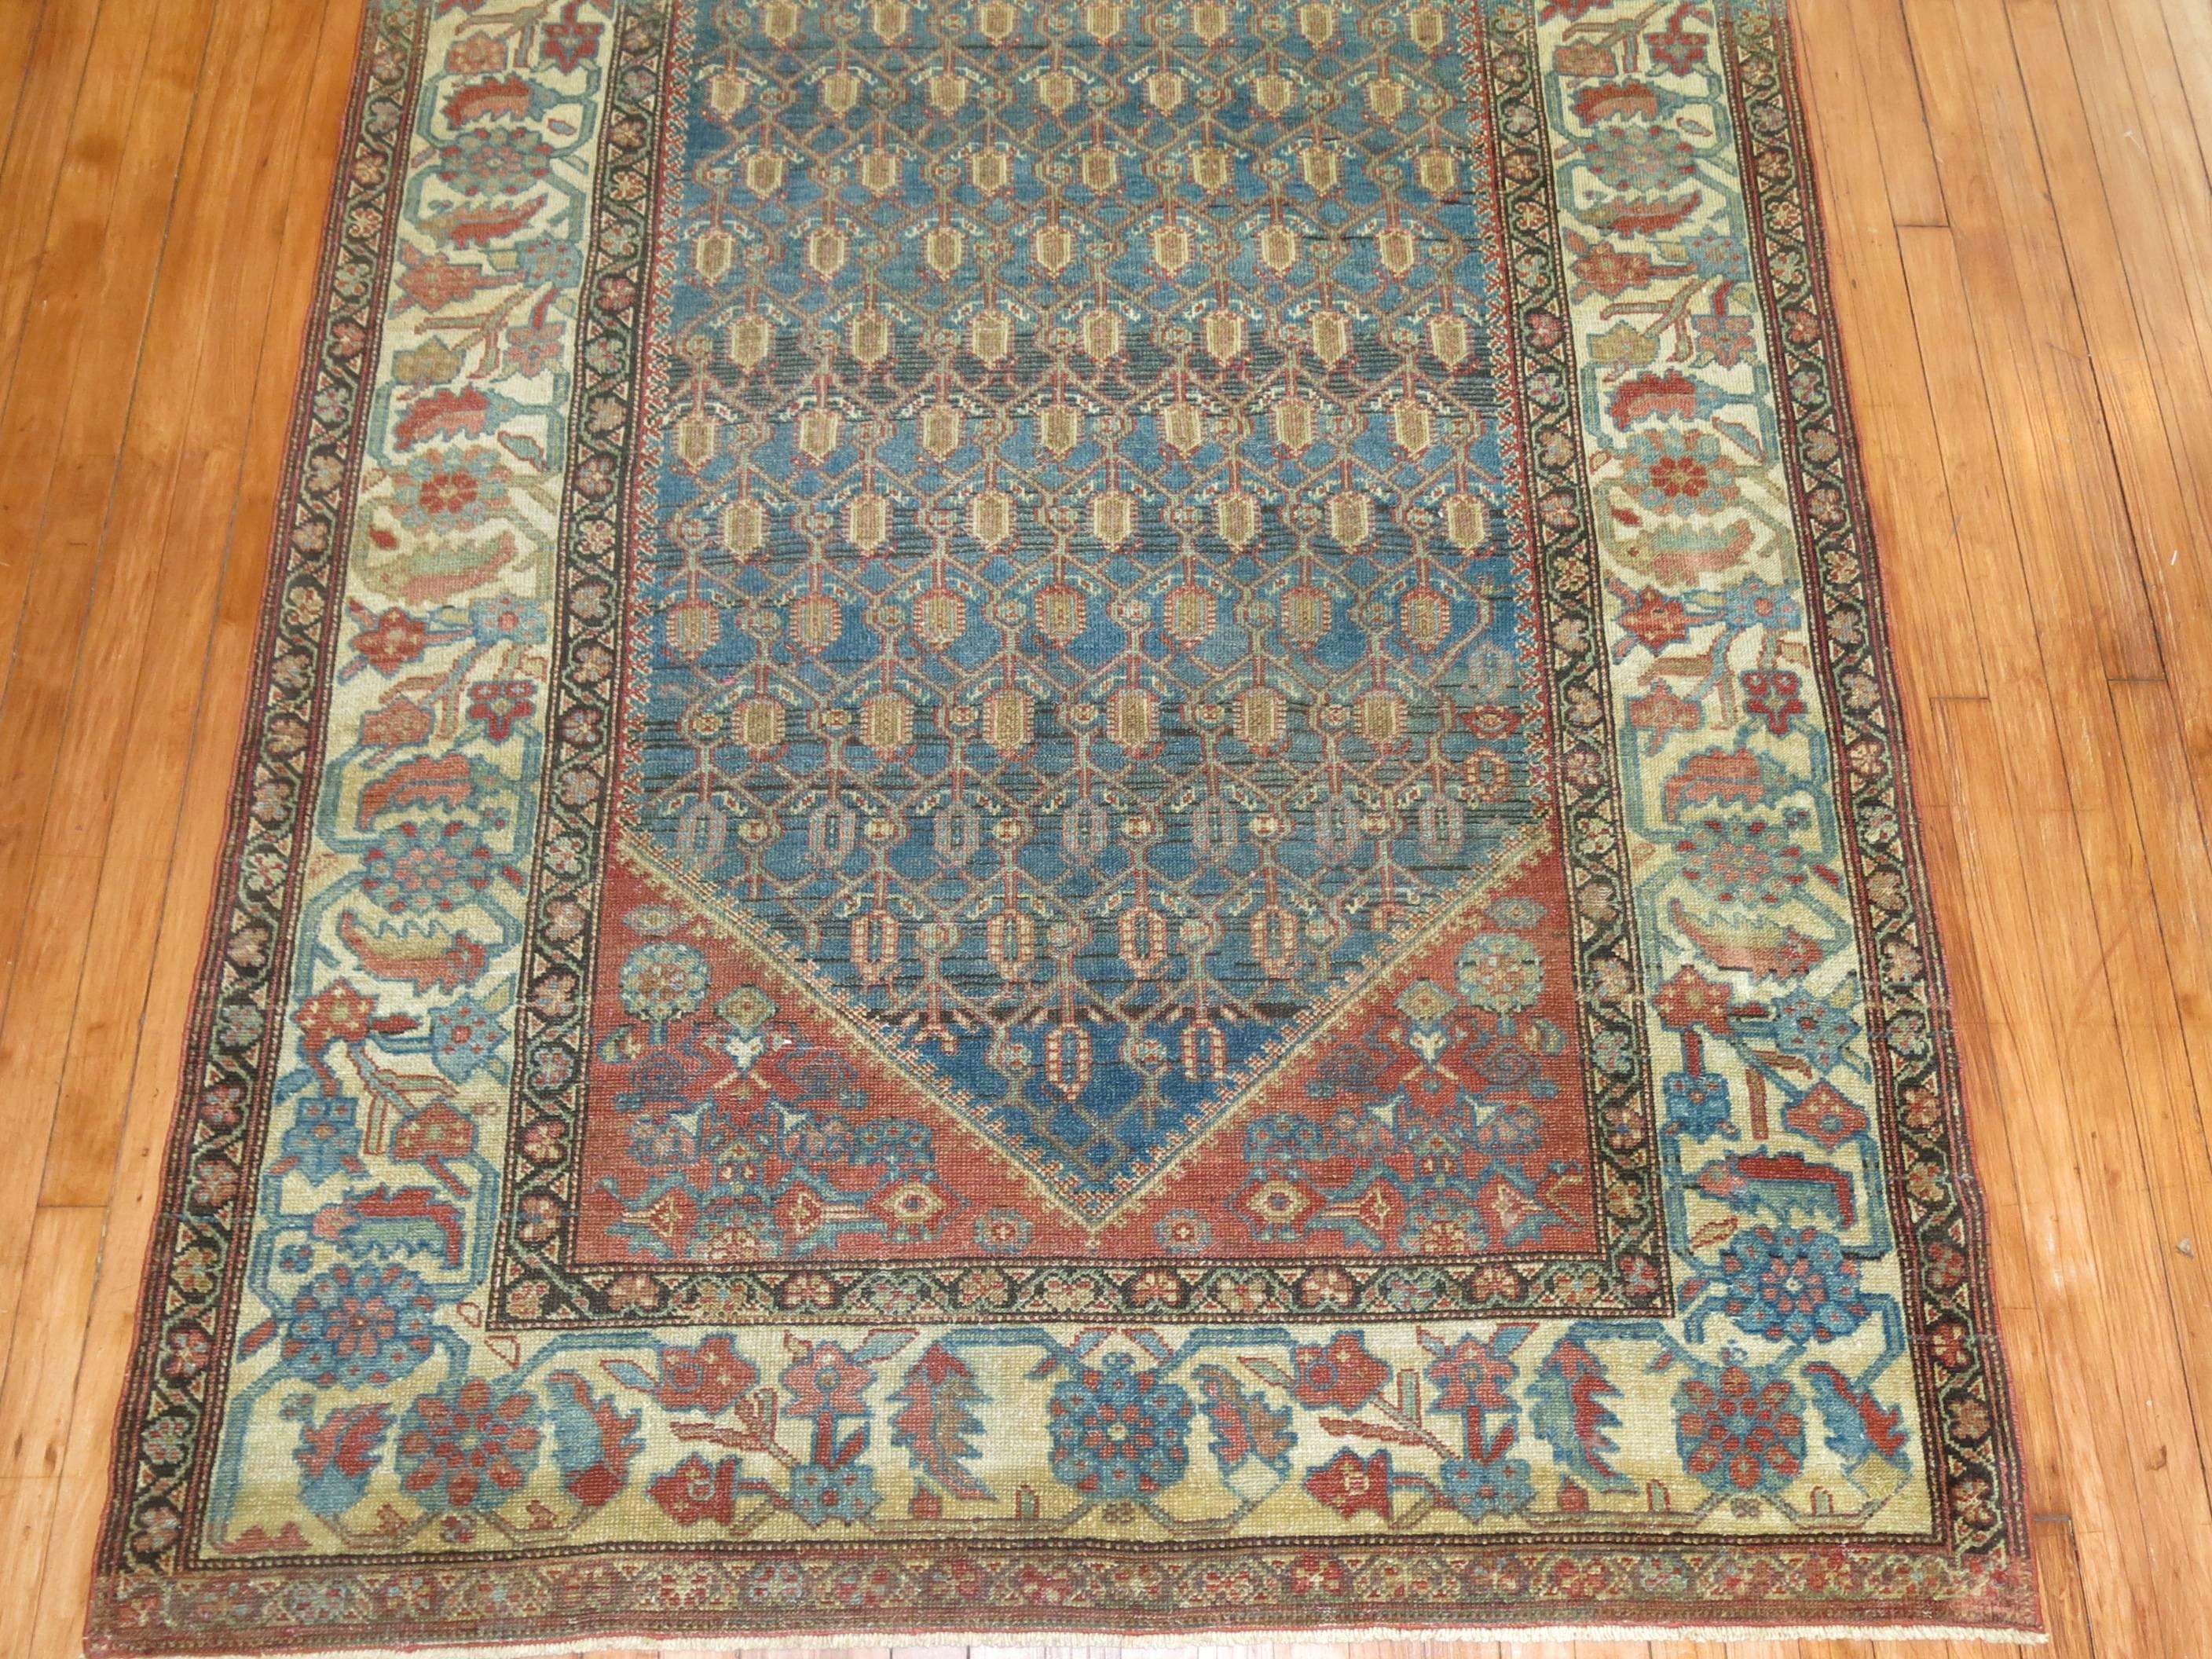 An early 20th century one of a kind Persian Malayer in predominant blues and rust tones

Size: 4'11